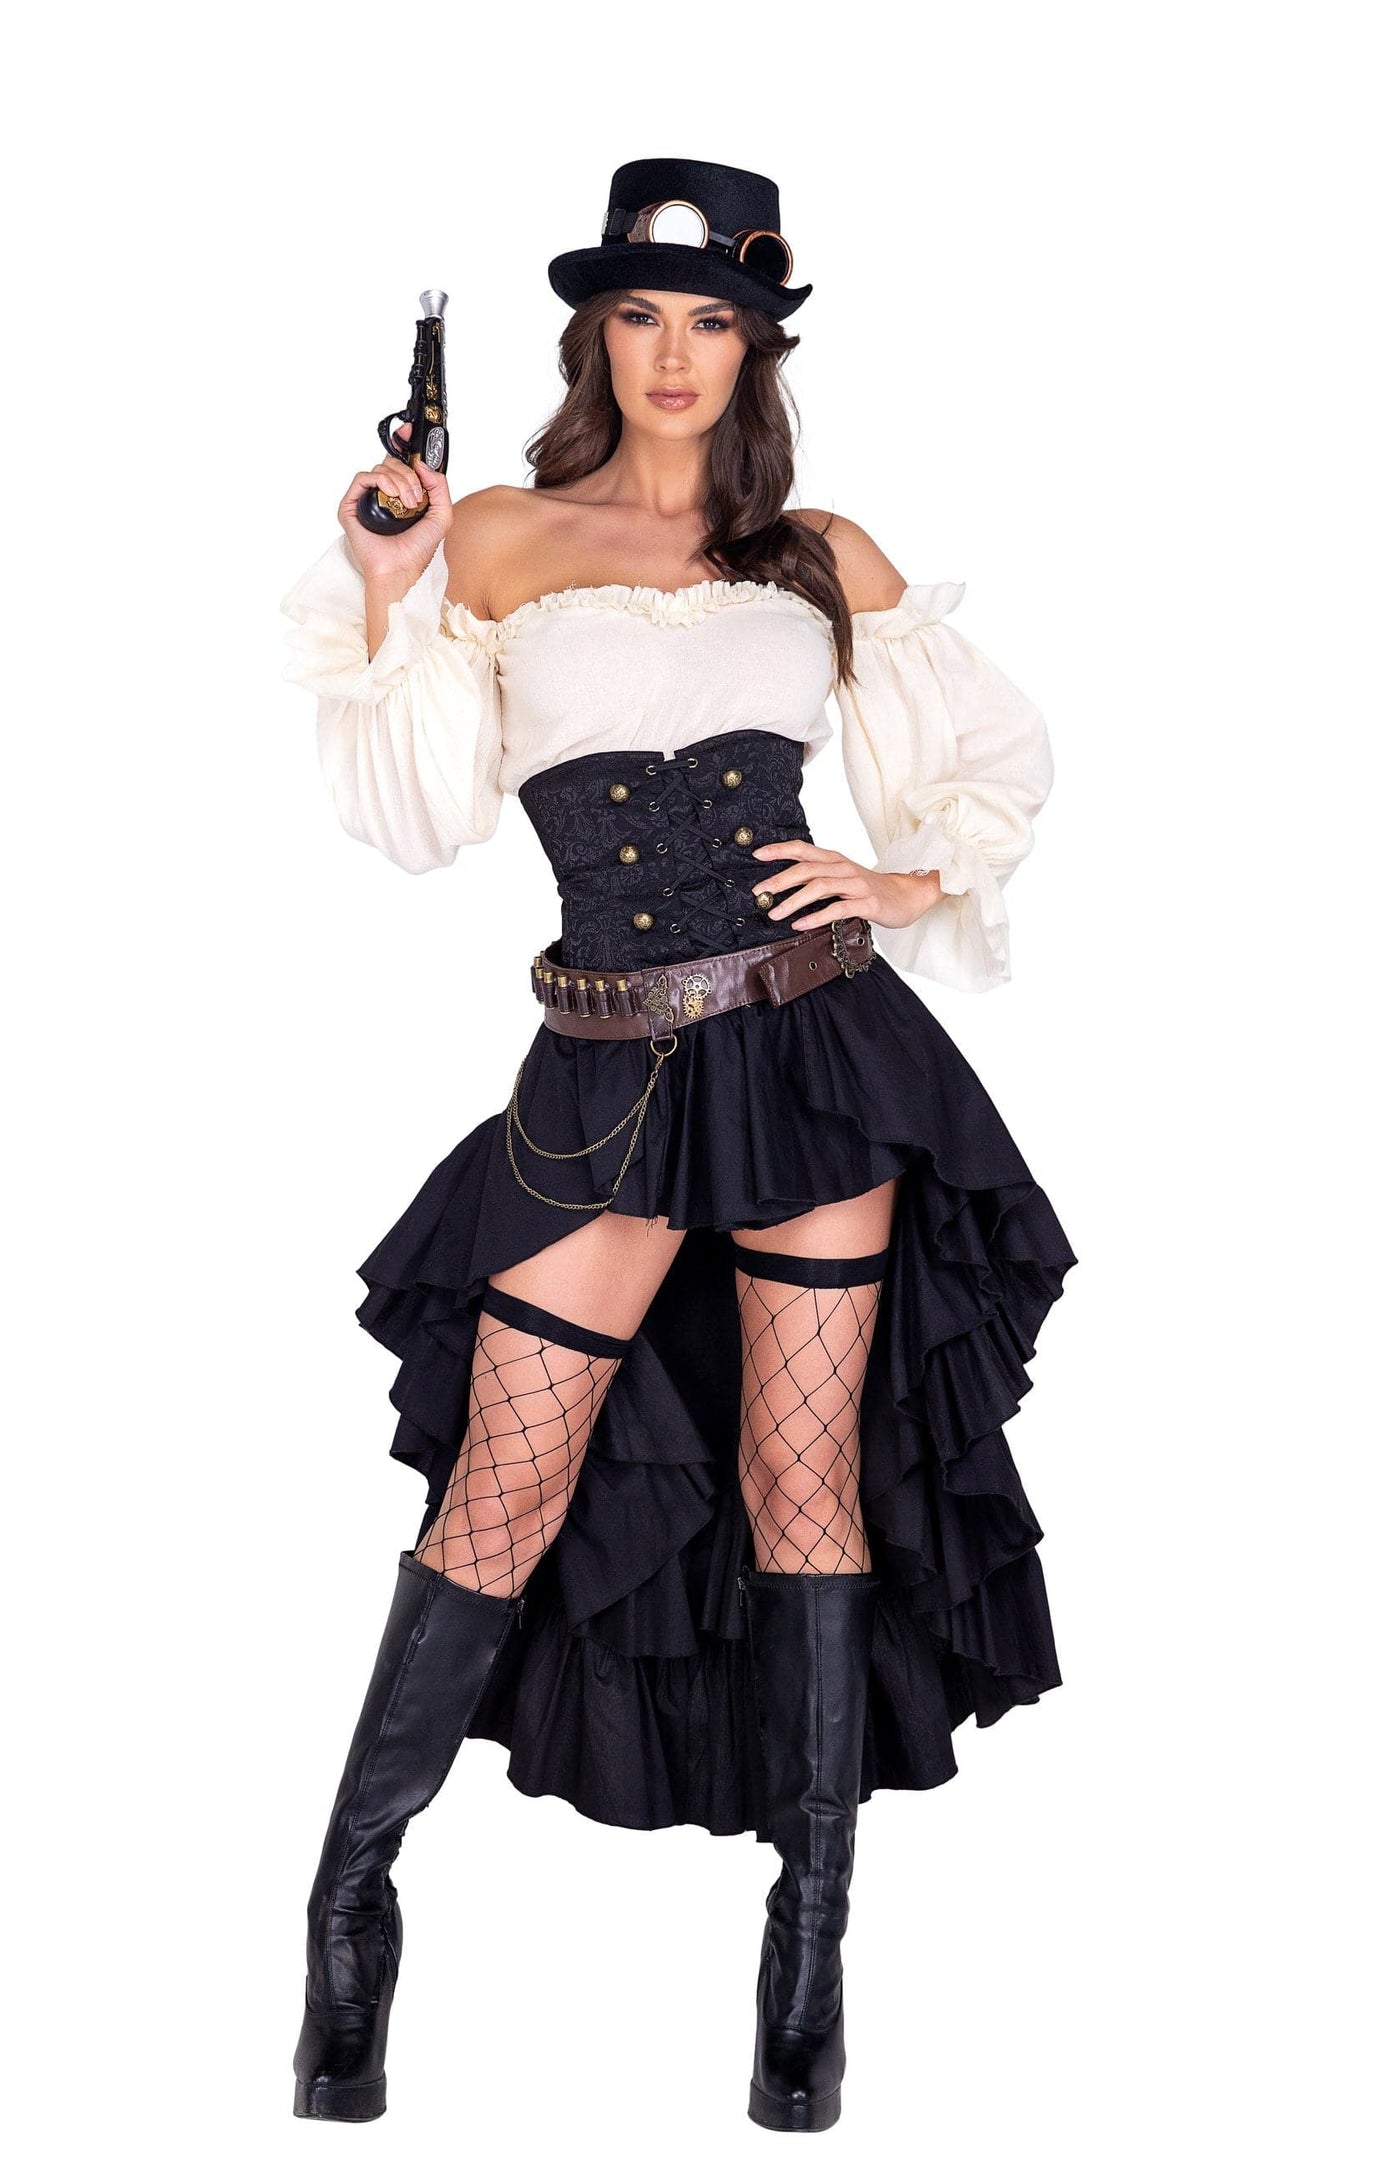 6pc. Steampunk Seductress Women's Costume - For Love of Lingerie